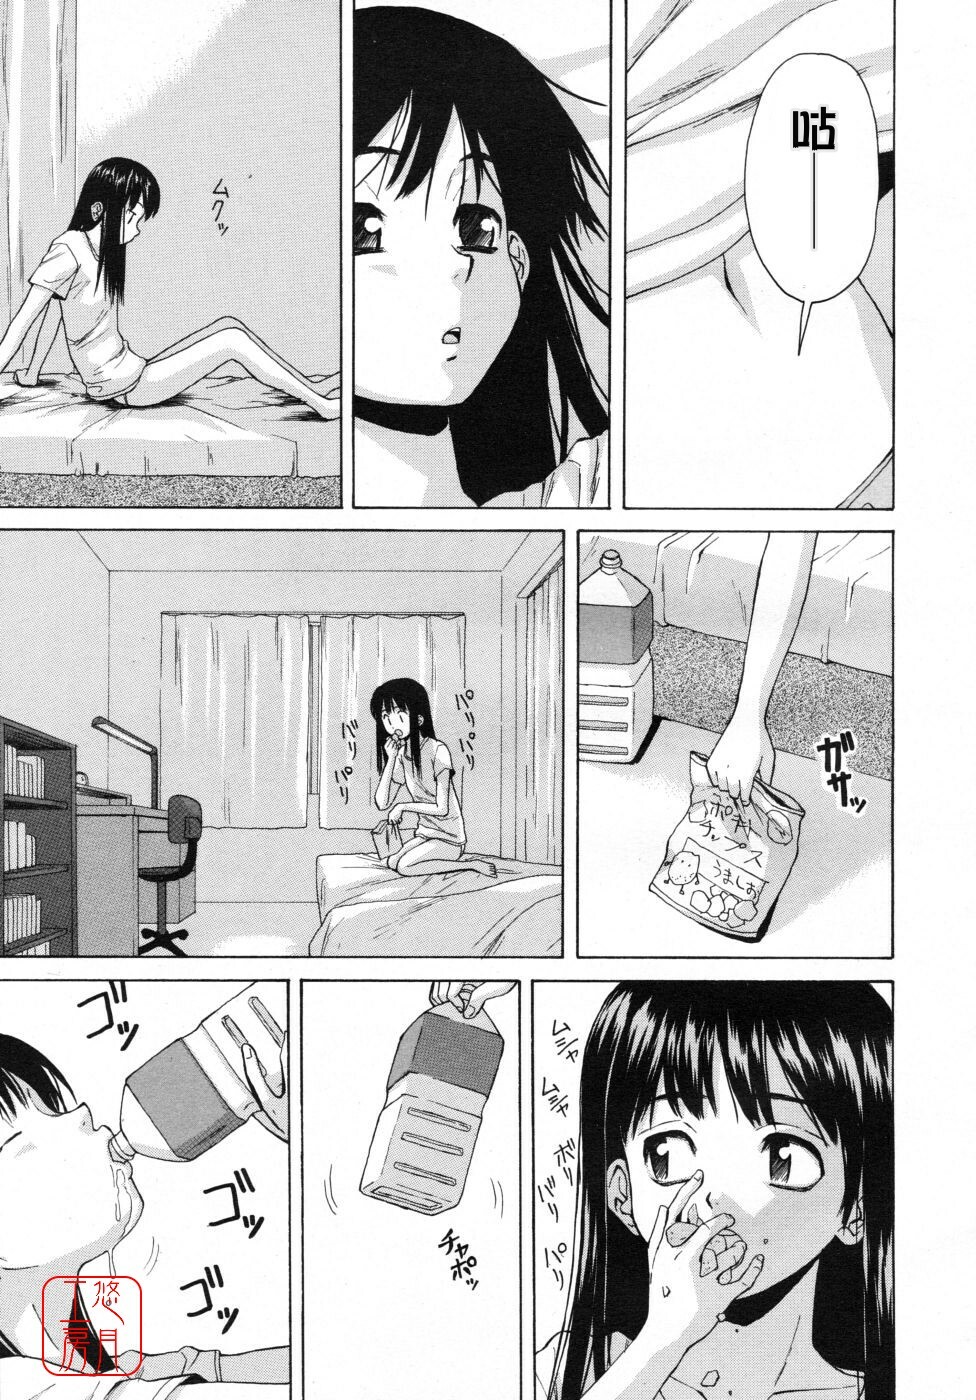 [Fuuga] Girl Friend 2 (Chinese) page 5 full